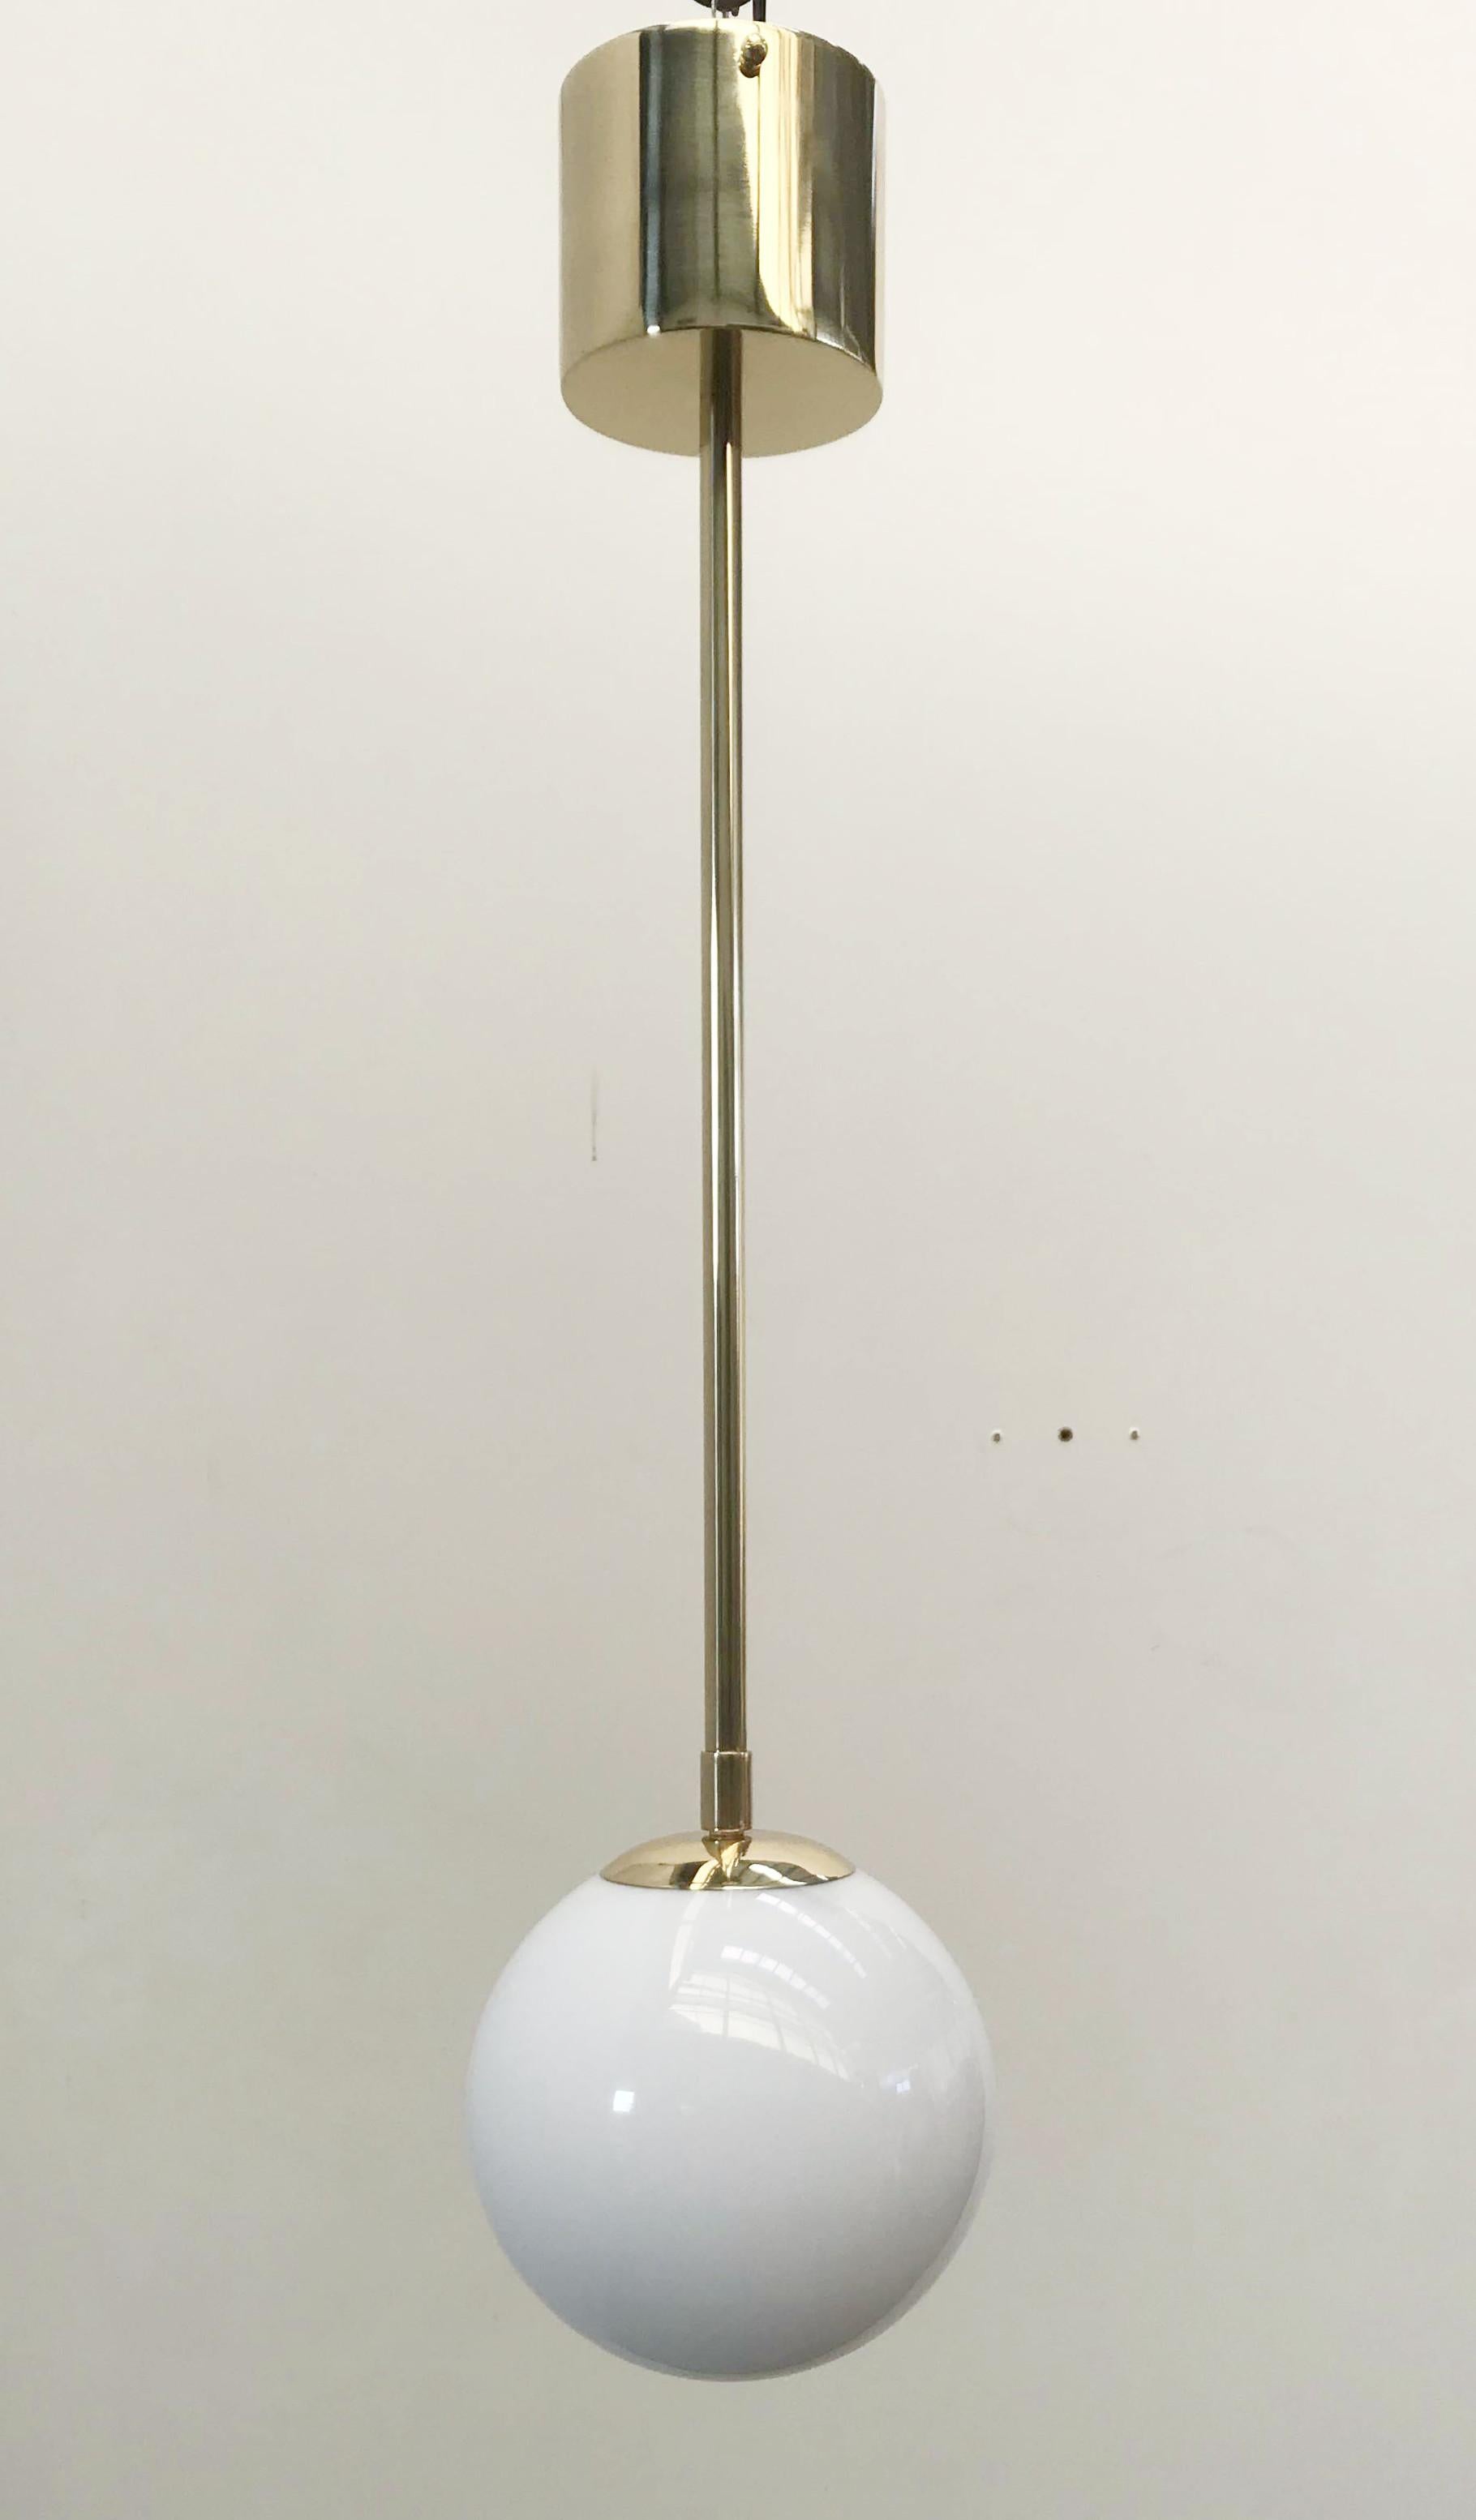 Italian pendant with Murano glass globe mounted on brass frame / Made in Italy
Designed by Fabio Ltd, inspired by Angelo Lelli and Arredoluce styles
1 light / E12 or E14 type / max 40W each
Height: 29.5 inches / Diameter: 8 inches
Order Only / This